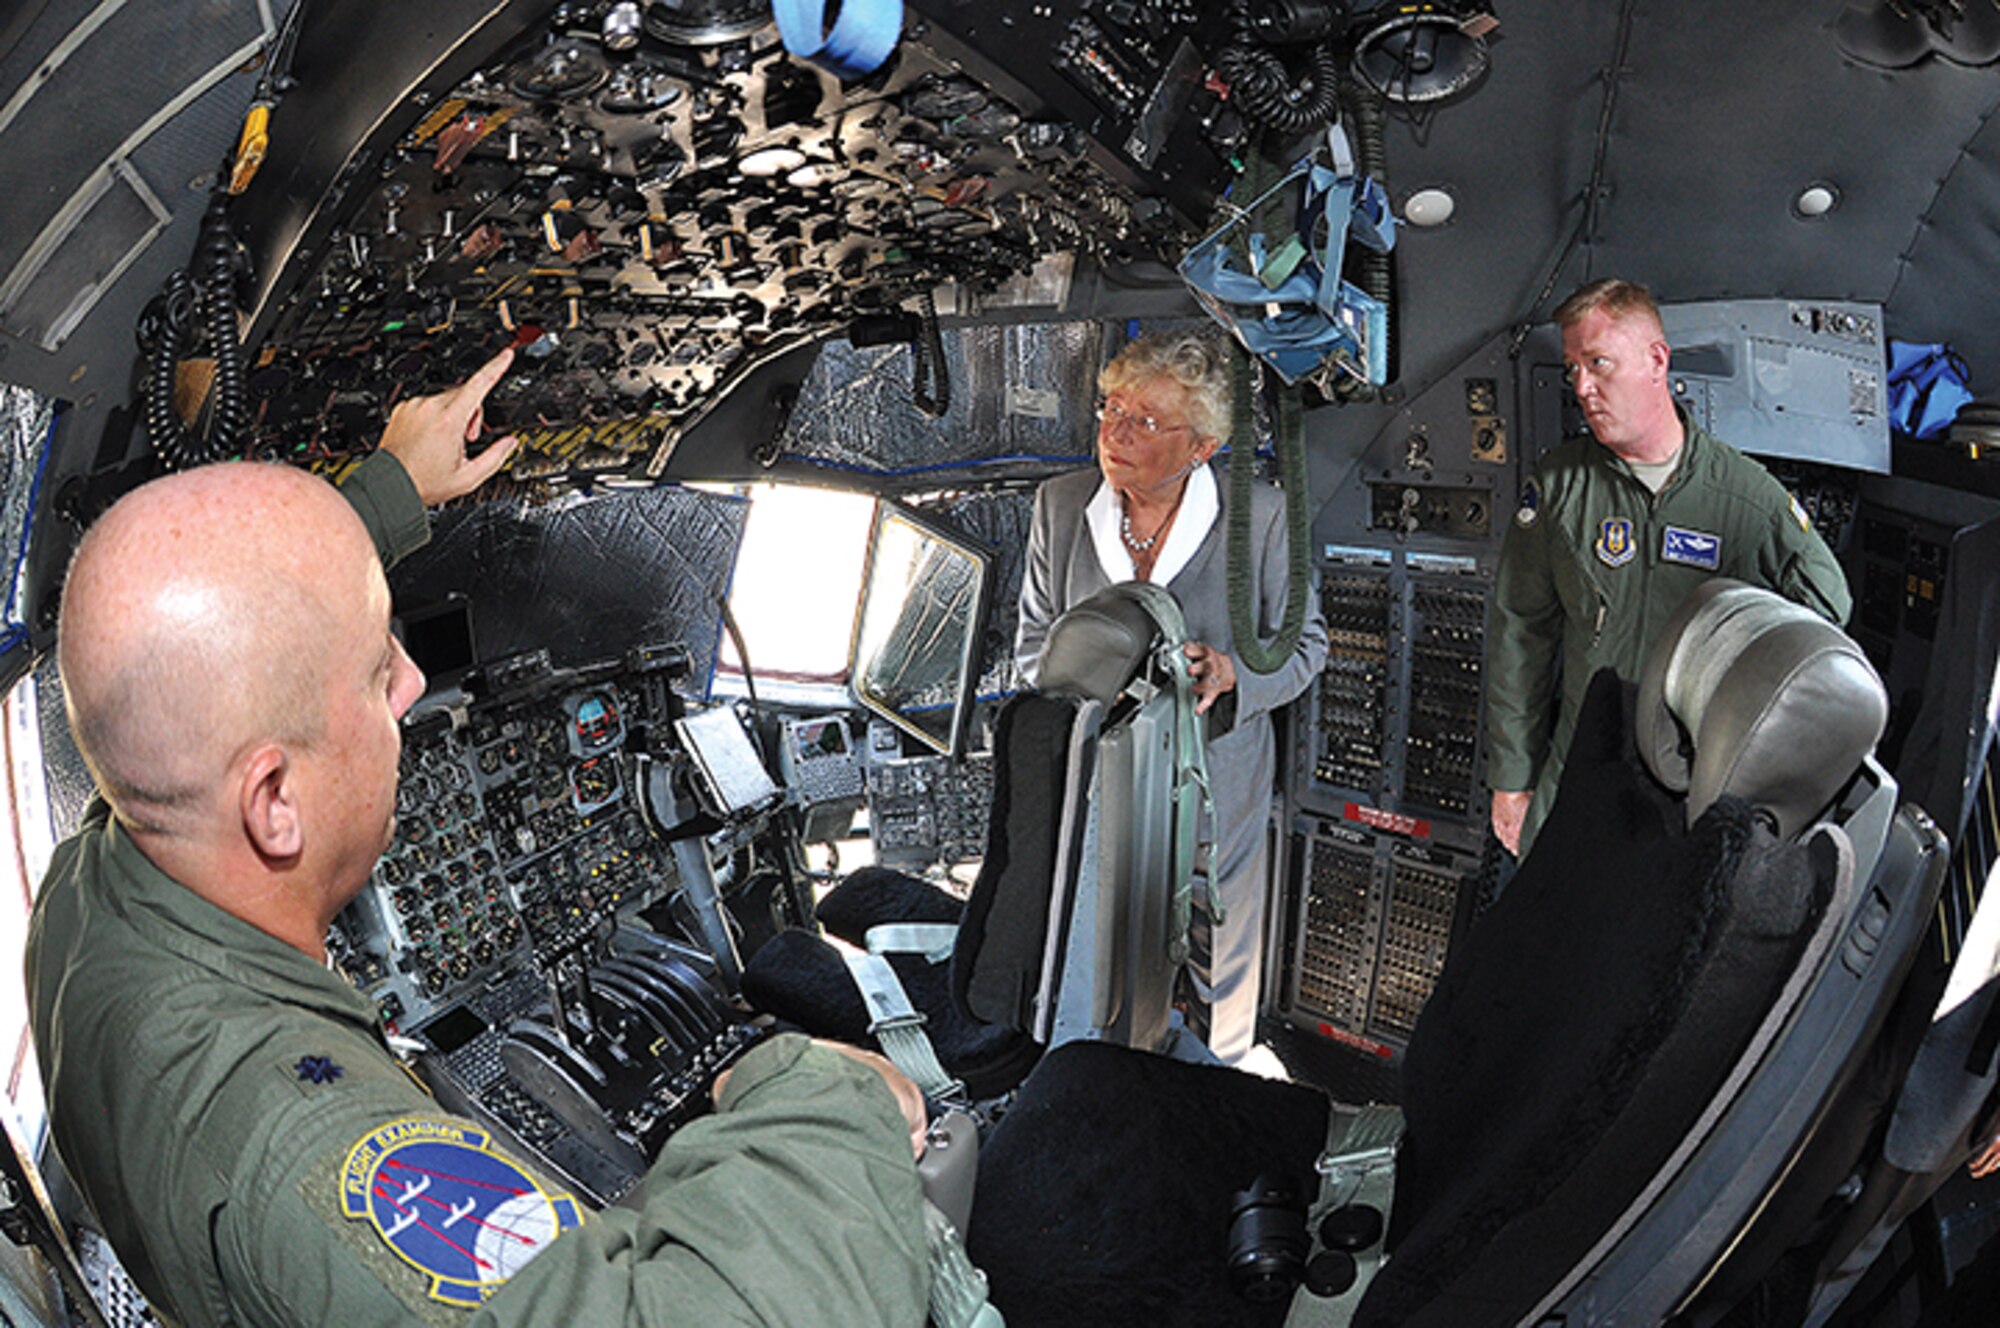 Alabama Lt. Gov. Ivey gets a tour of the flight deck of a C-130 from Lt. Col. Steve Catchings, left, and Senior Master Sgt. Adam Childers. (Photo by Master Sgt. Eric Sharman)